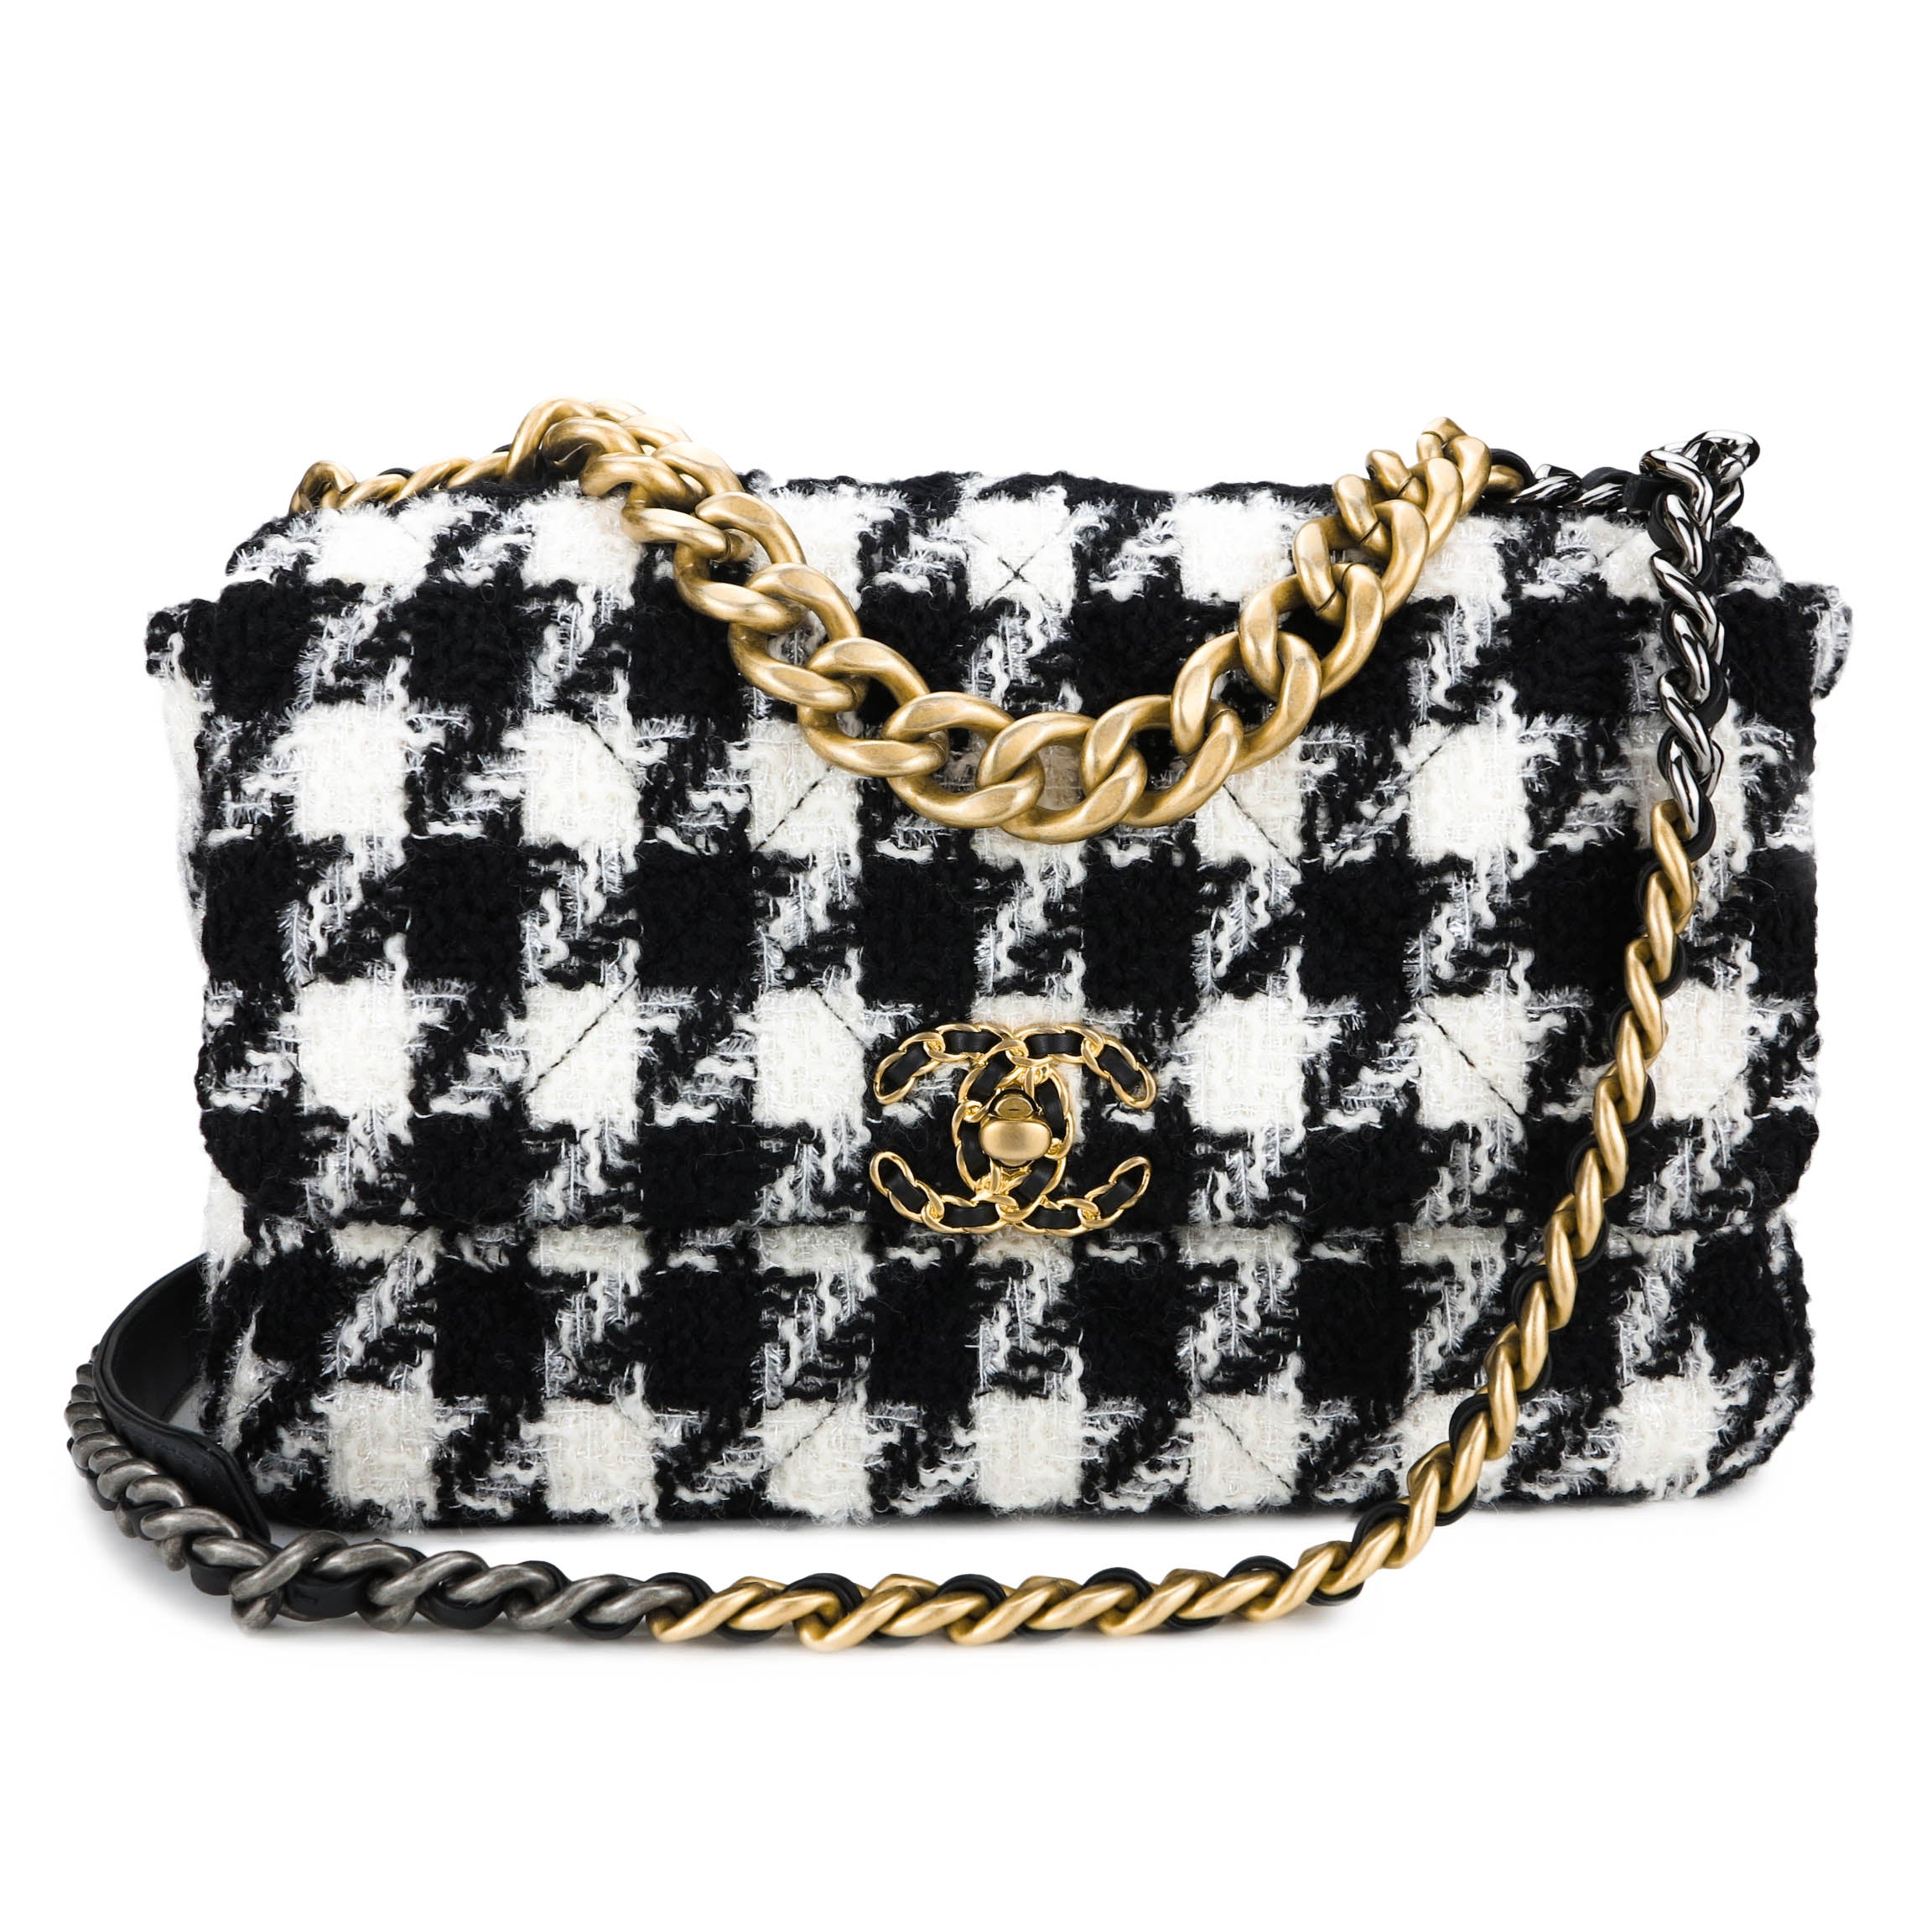 CHANEL 19 Medium Flap Bag in Black And White Houndstooth Tweed